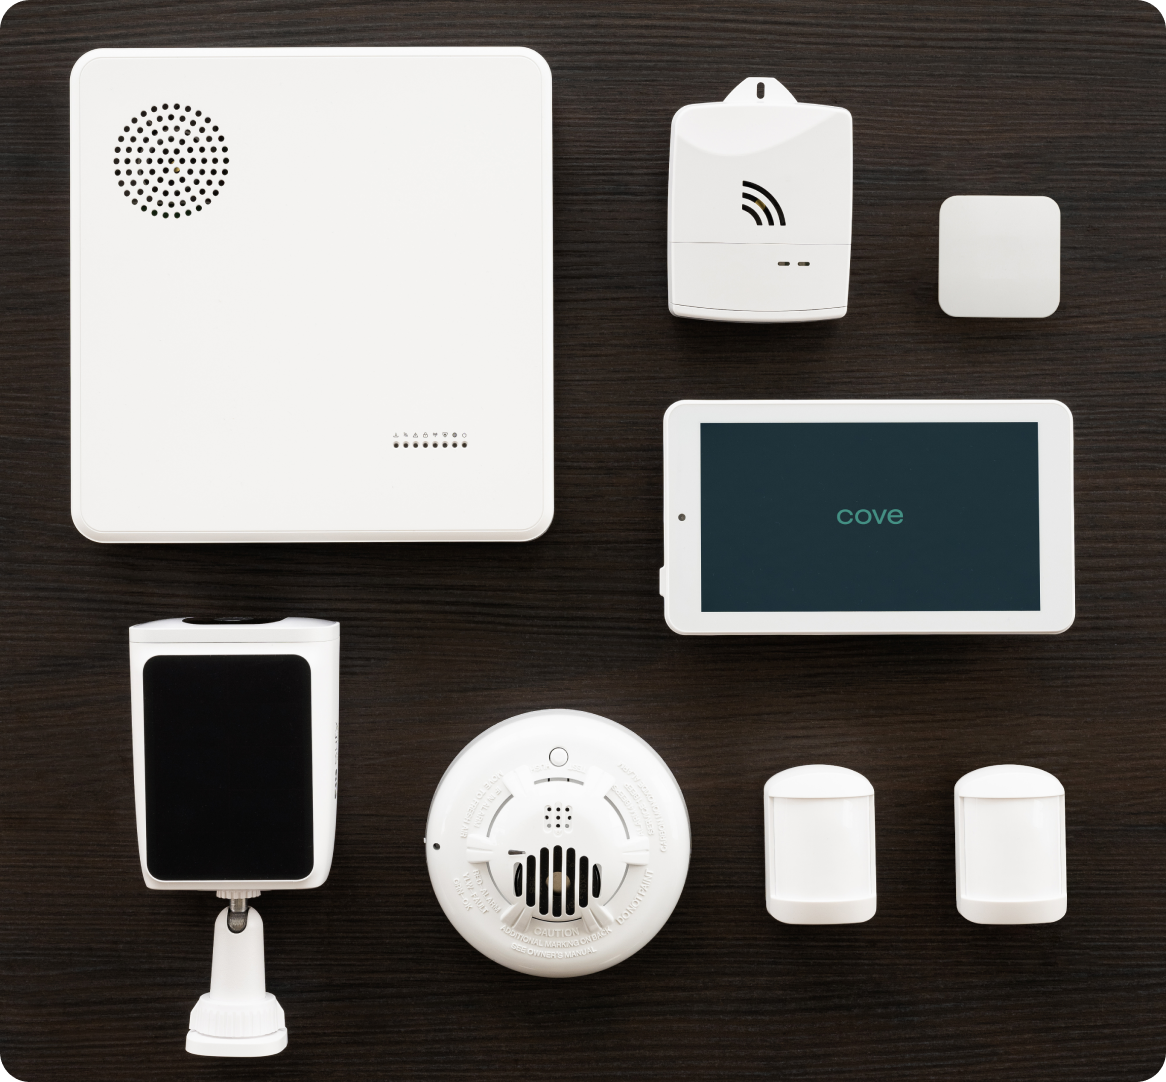 Cove home security system equipment.